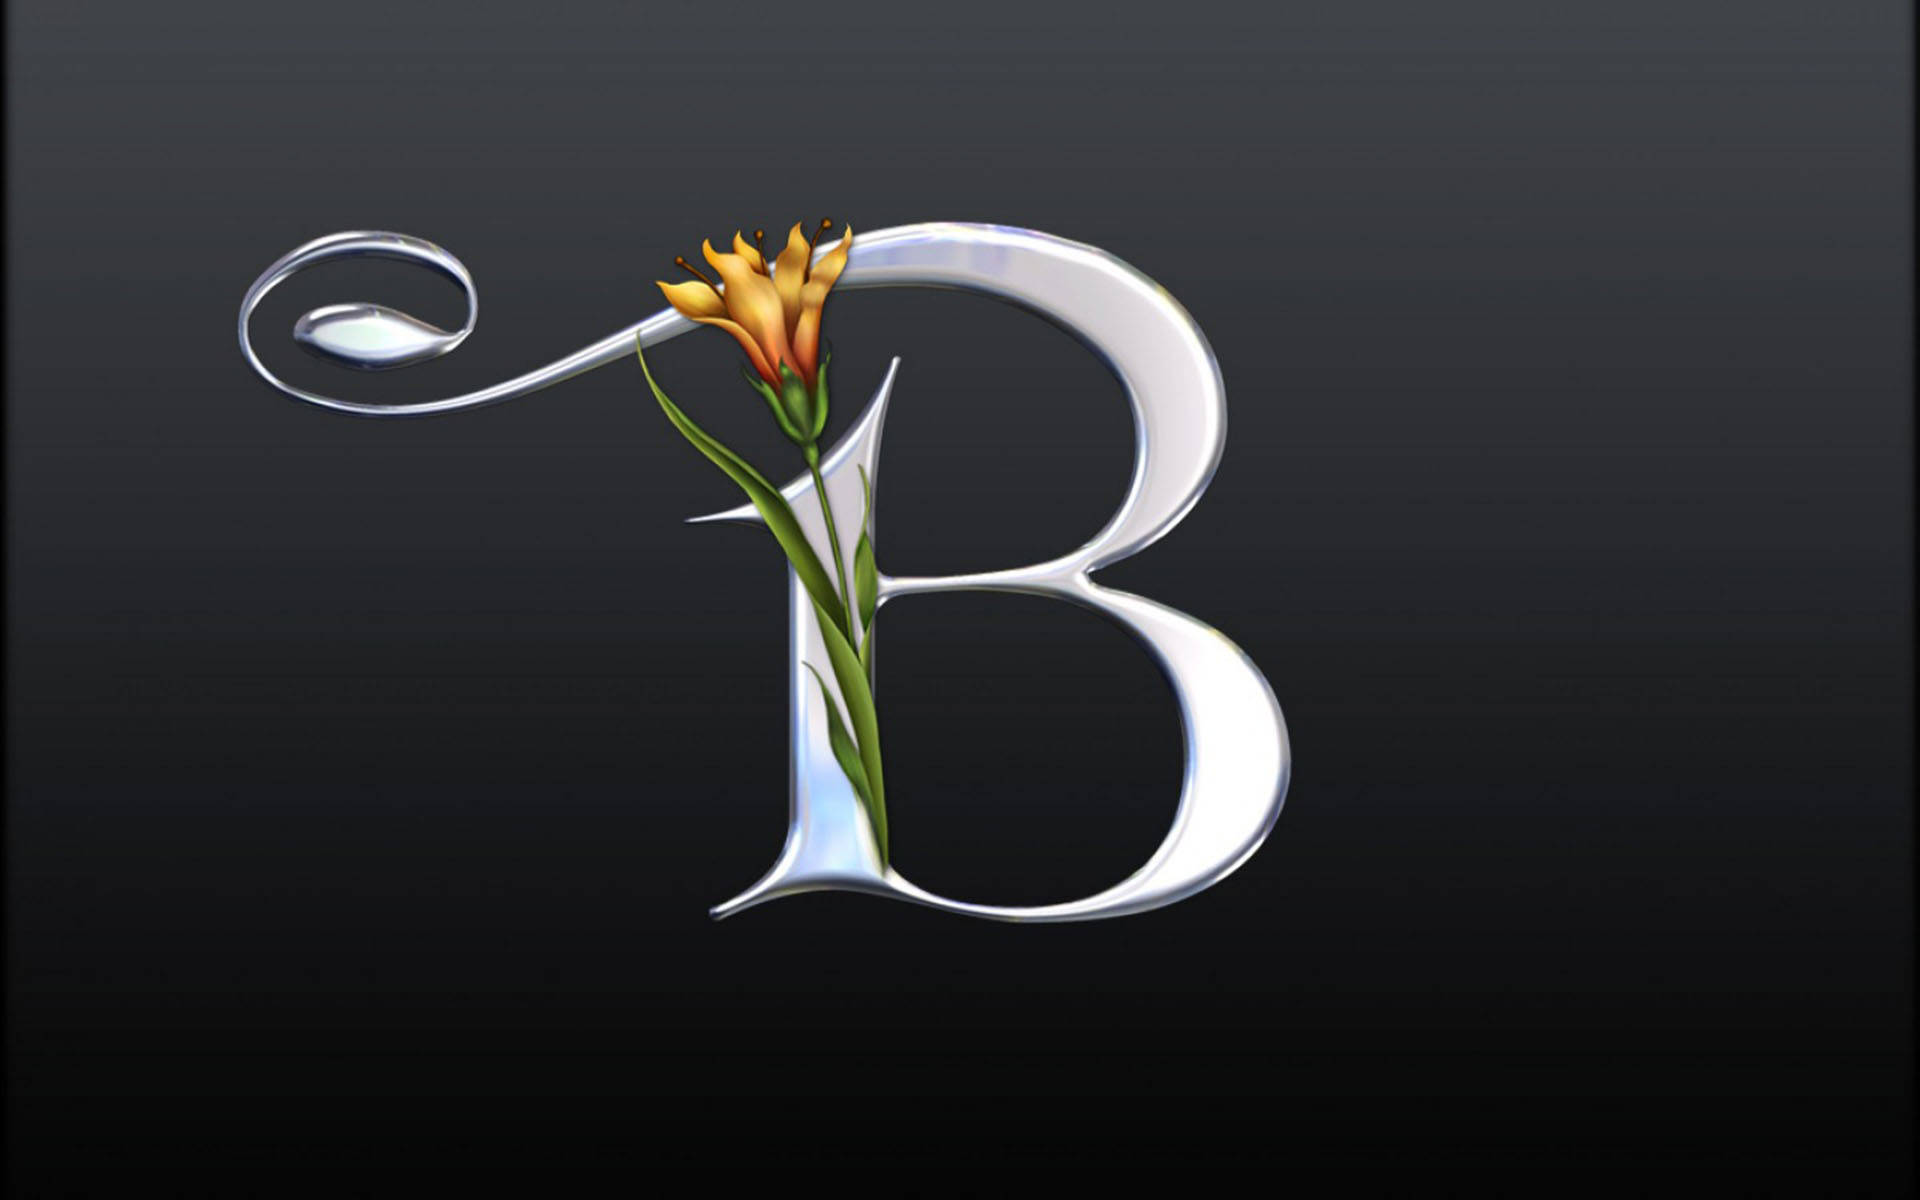 Silver Plated Letter B